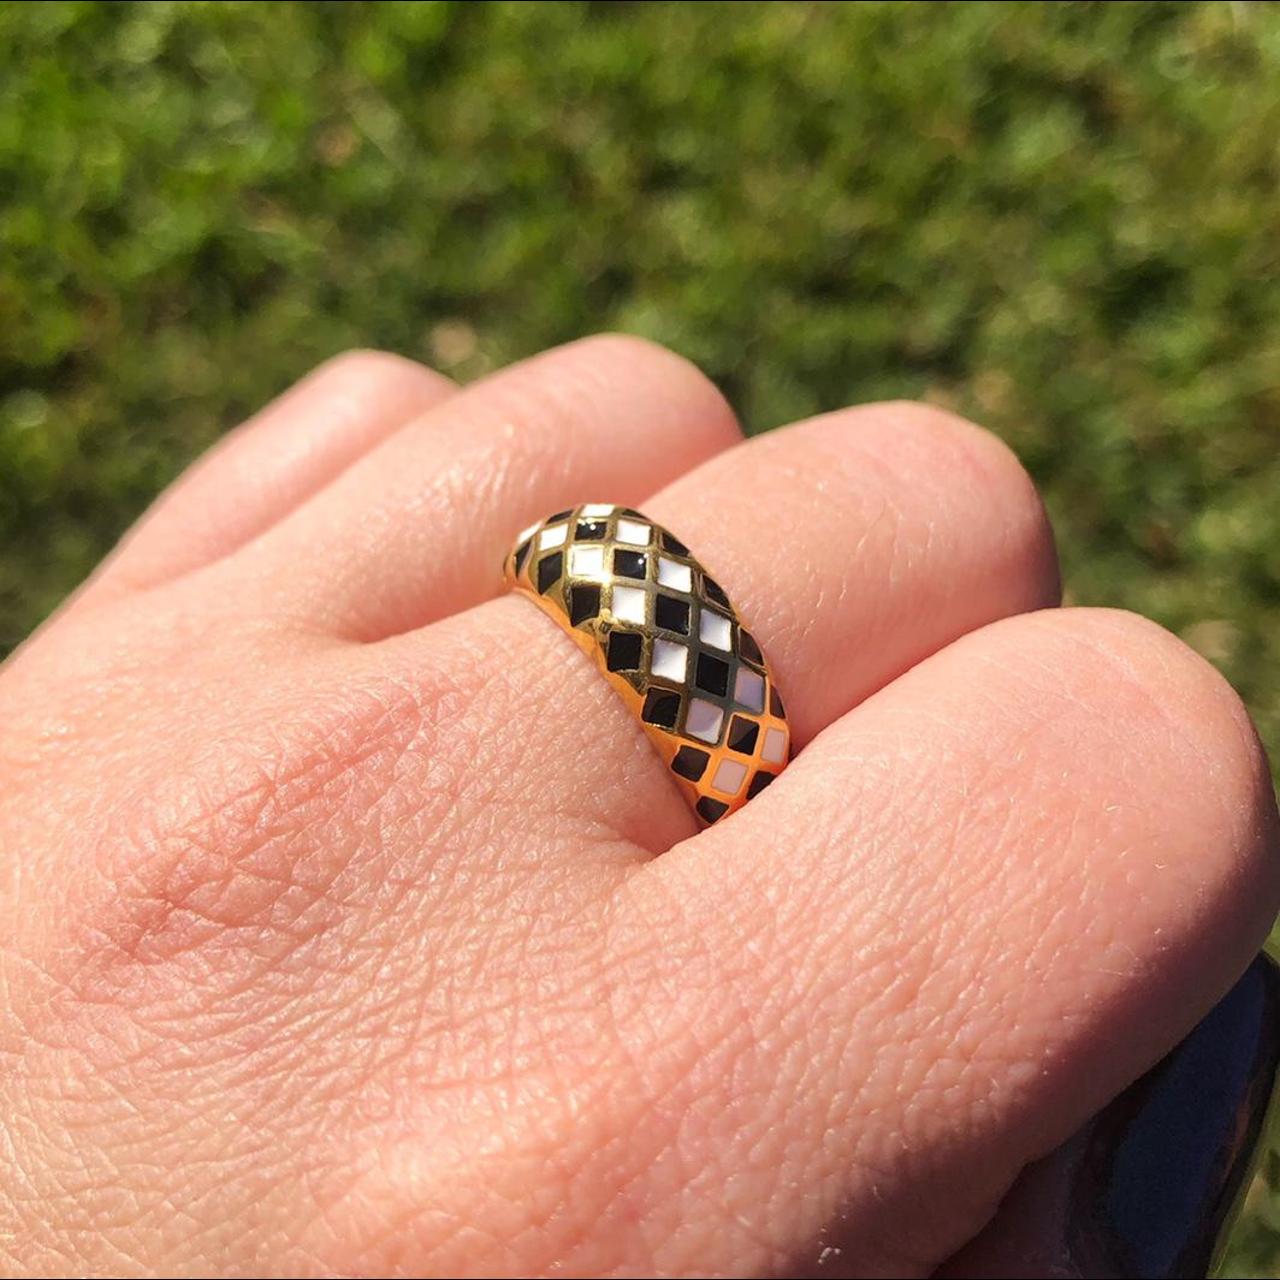 Product Image 1 - New! “Demi” Checker Gold Ring

Stainless